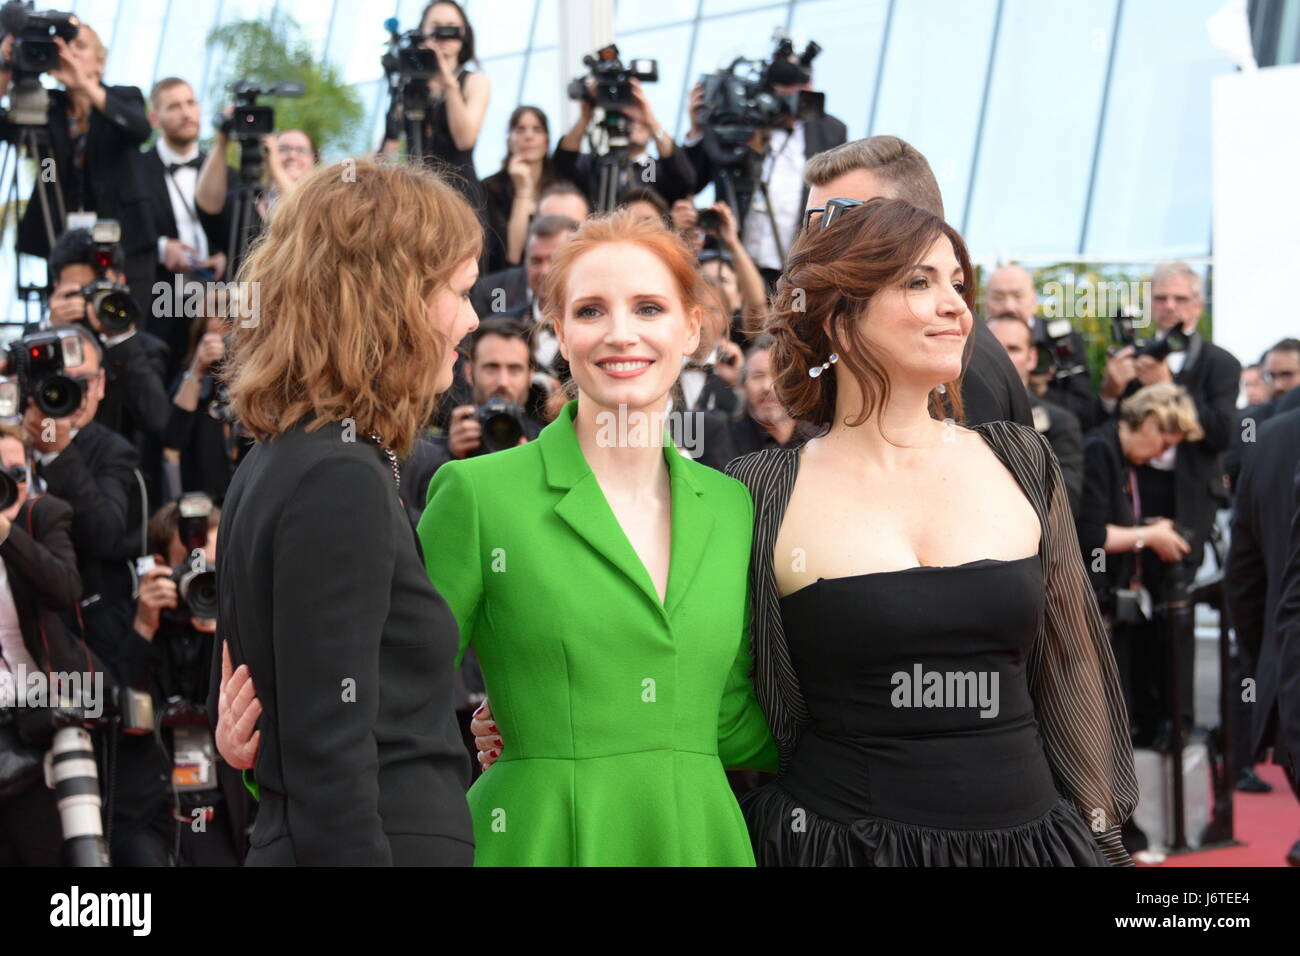 Cannes, France. 21st May, 2017. CANNES, FRANCE - MAY 21: Member of the Feature Film jury Agnes Jaoui, actress and member of the Feature Film jury Jessica Chastain and member of the Feature Film jury Maren Ade attend the 'The Meyerowitz Stories' screening during the 70th annual Cannes Film Festival at Palais des Festivals on May 21, 2017 in Cannes, France Credit: Frederick Injimbert/ZUMA Wire/Alamy Live News Stock Photo